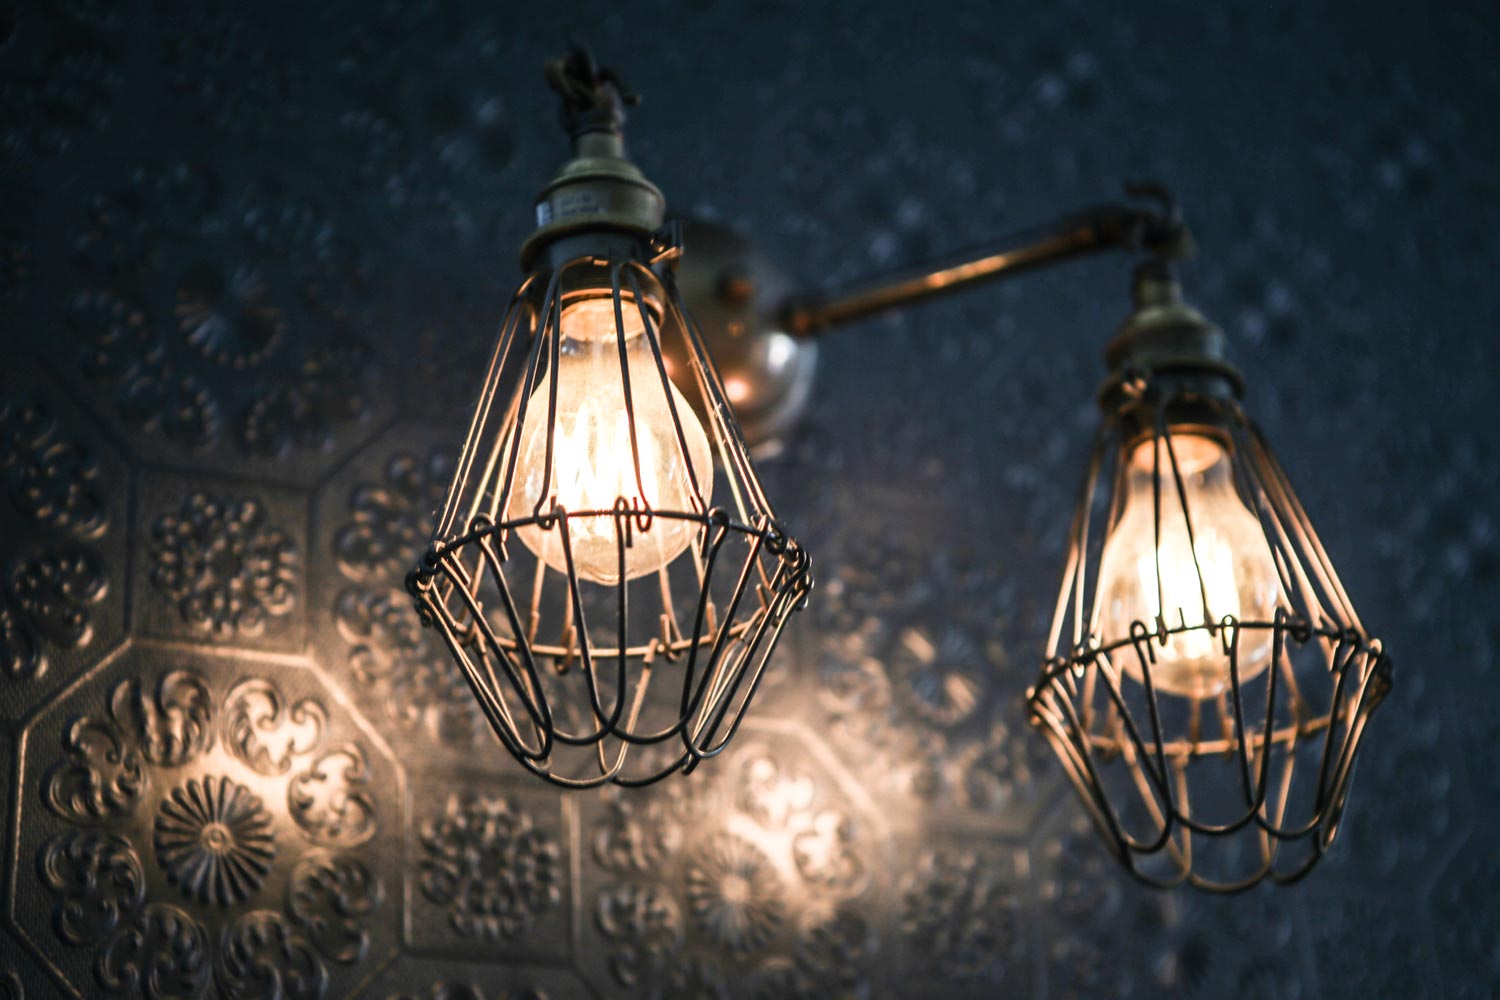 Industrial lighting helps enliven the traditional charm at O'Reilly's Irish pub, Brussels